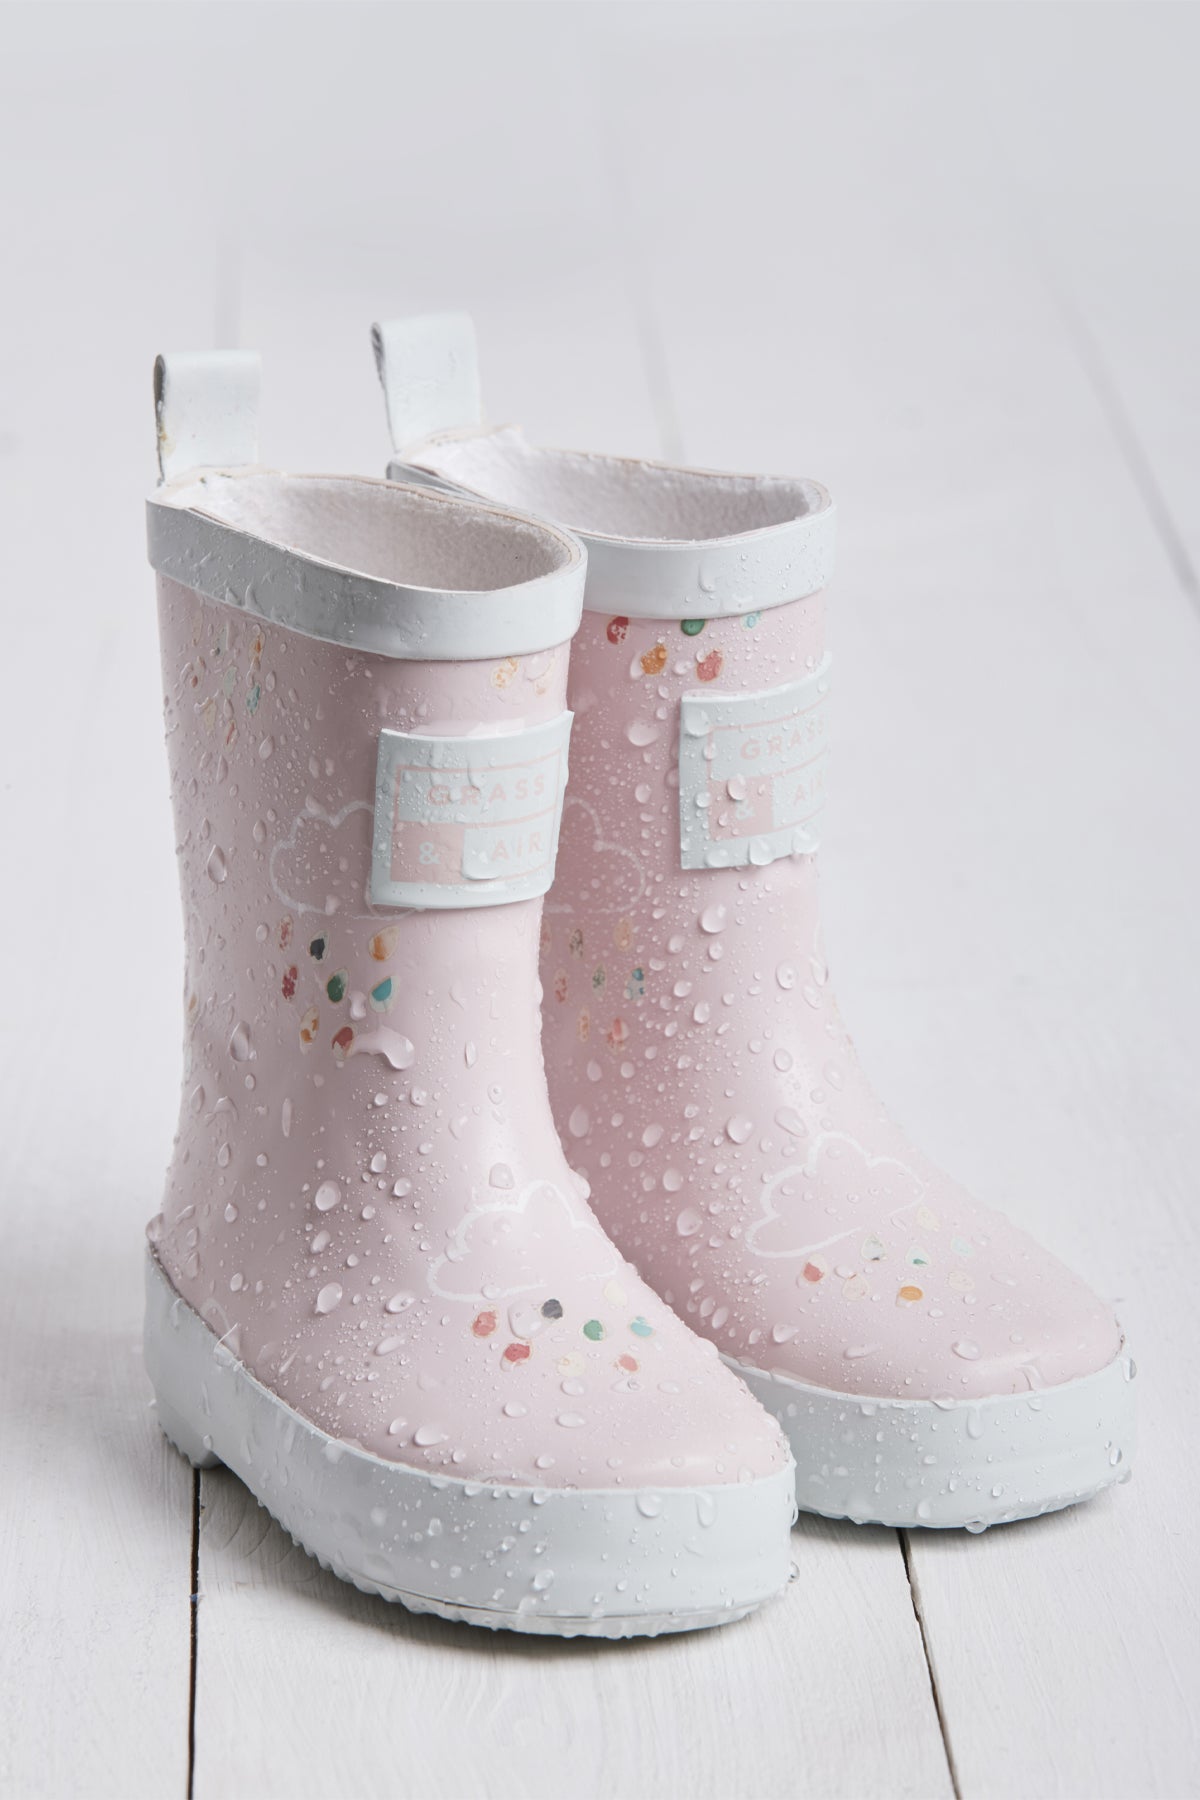 GRASS & AIR - Infant Colour Changing Wellies in Baby Pink